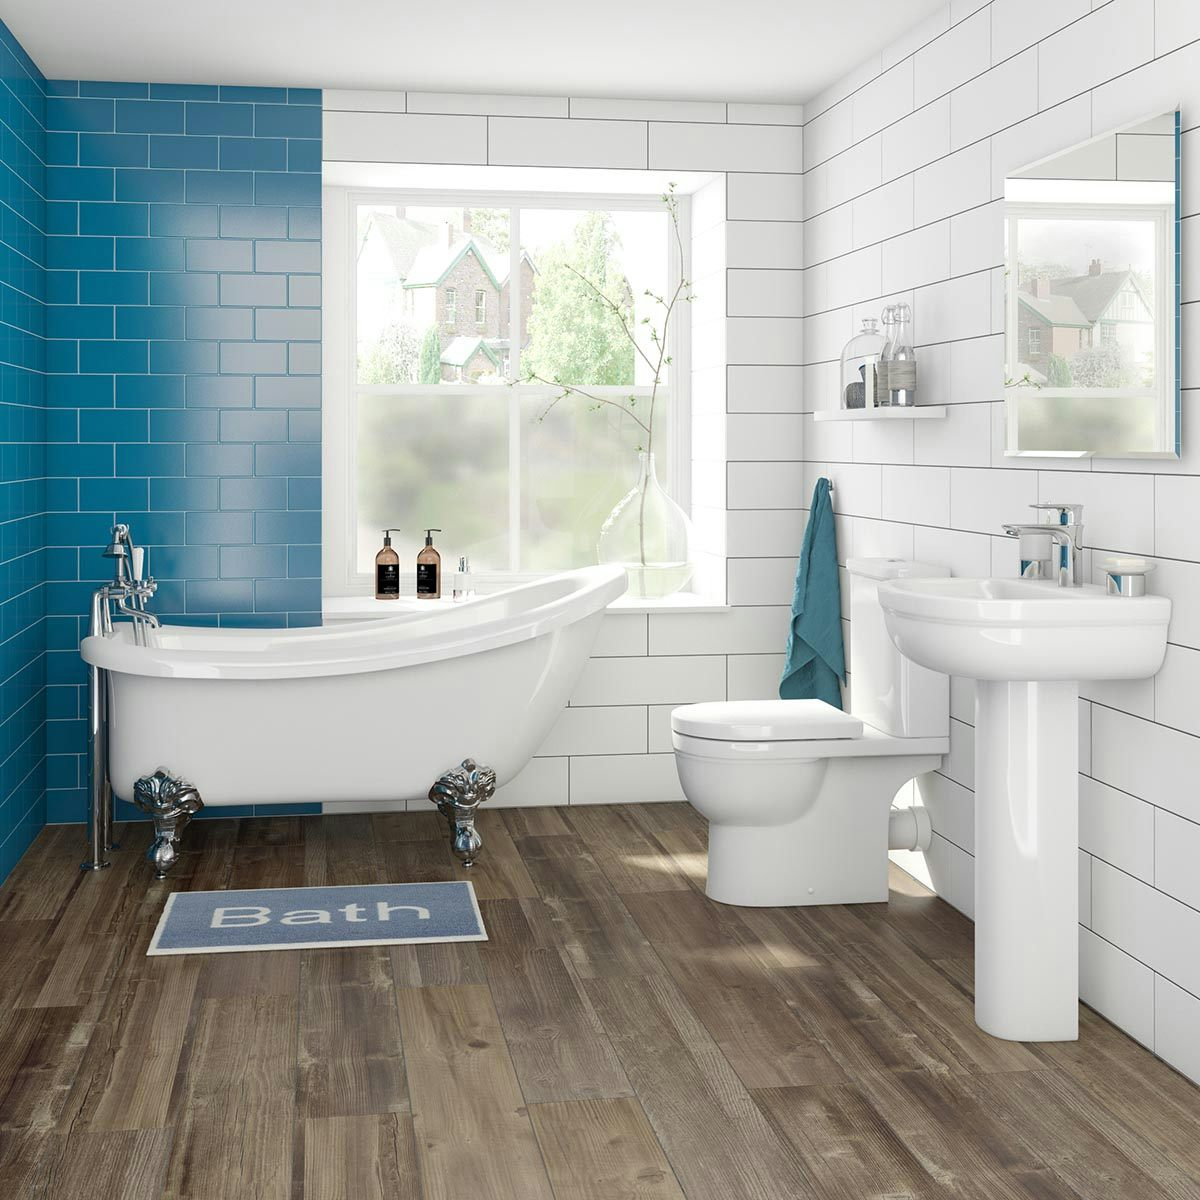 Orchard Elsdon bathroom suite with traditional slipper bath 1690 x 705